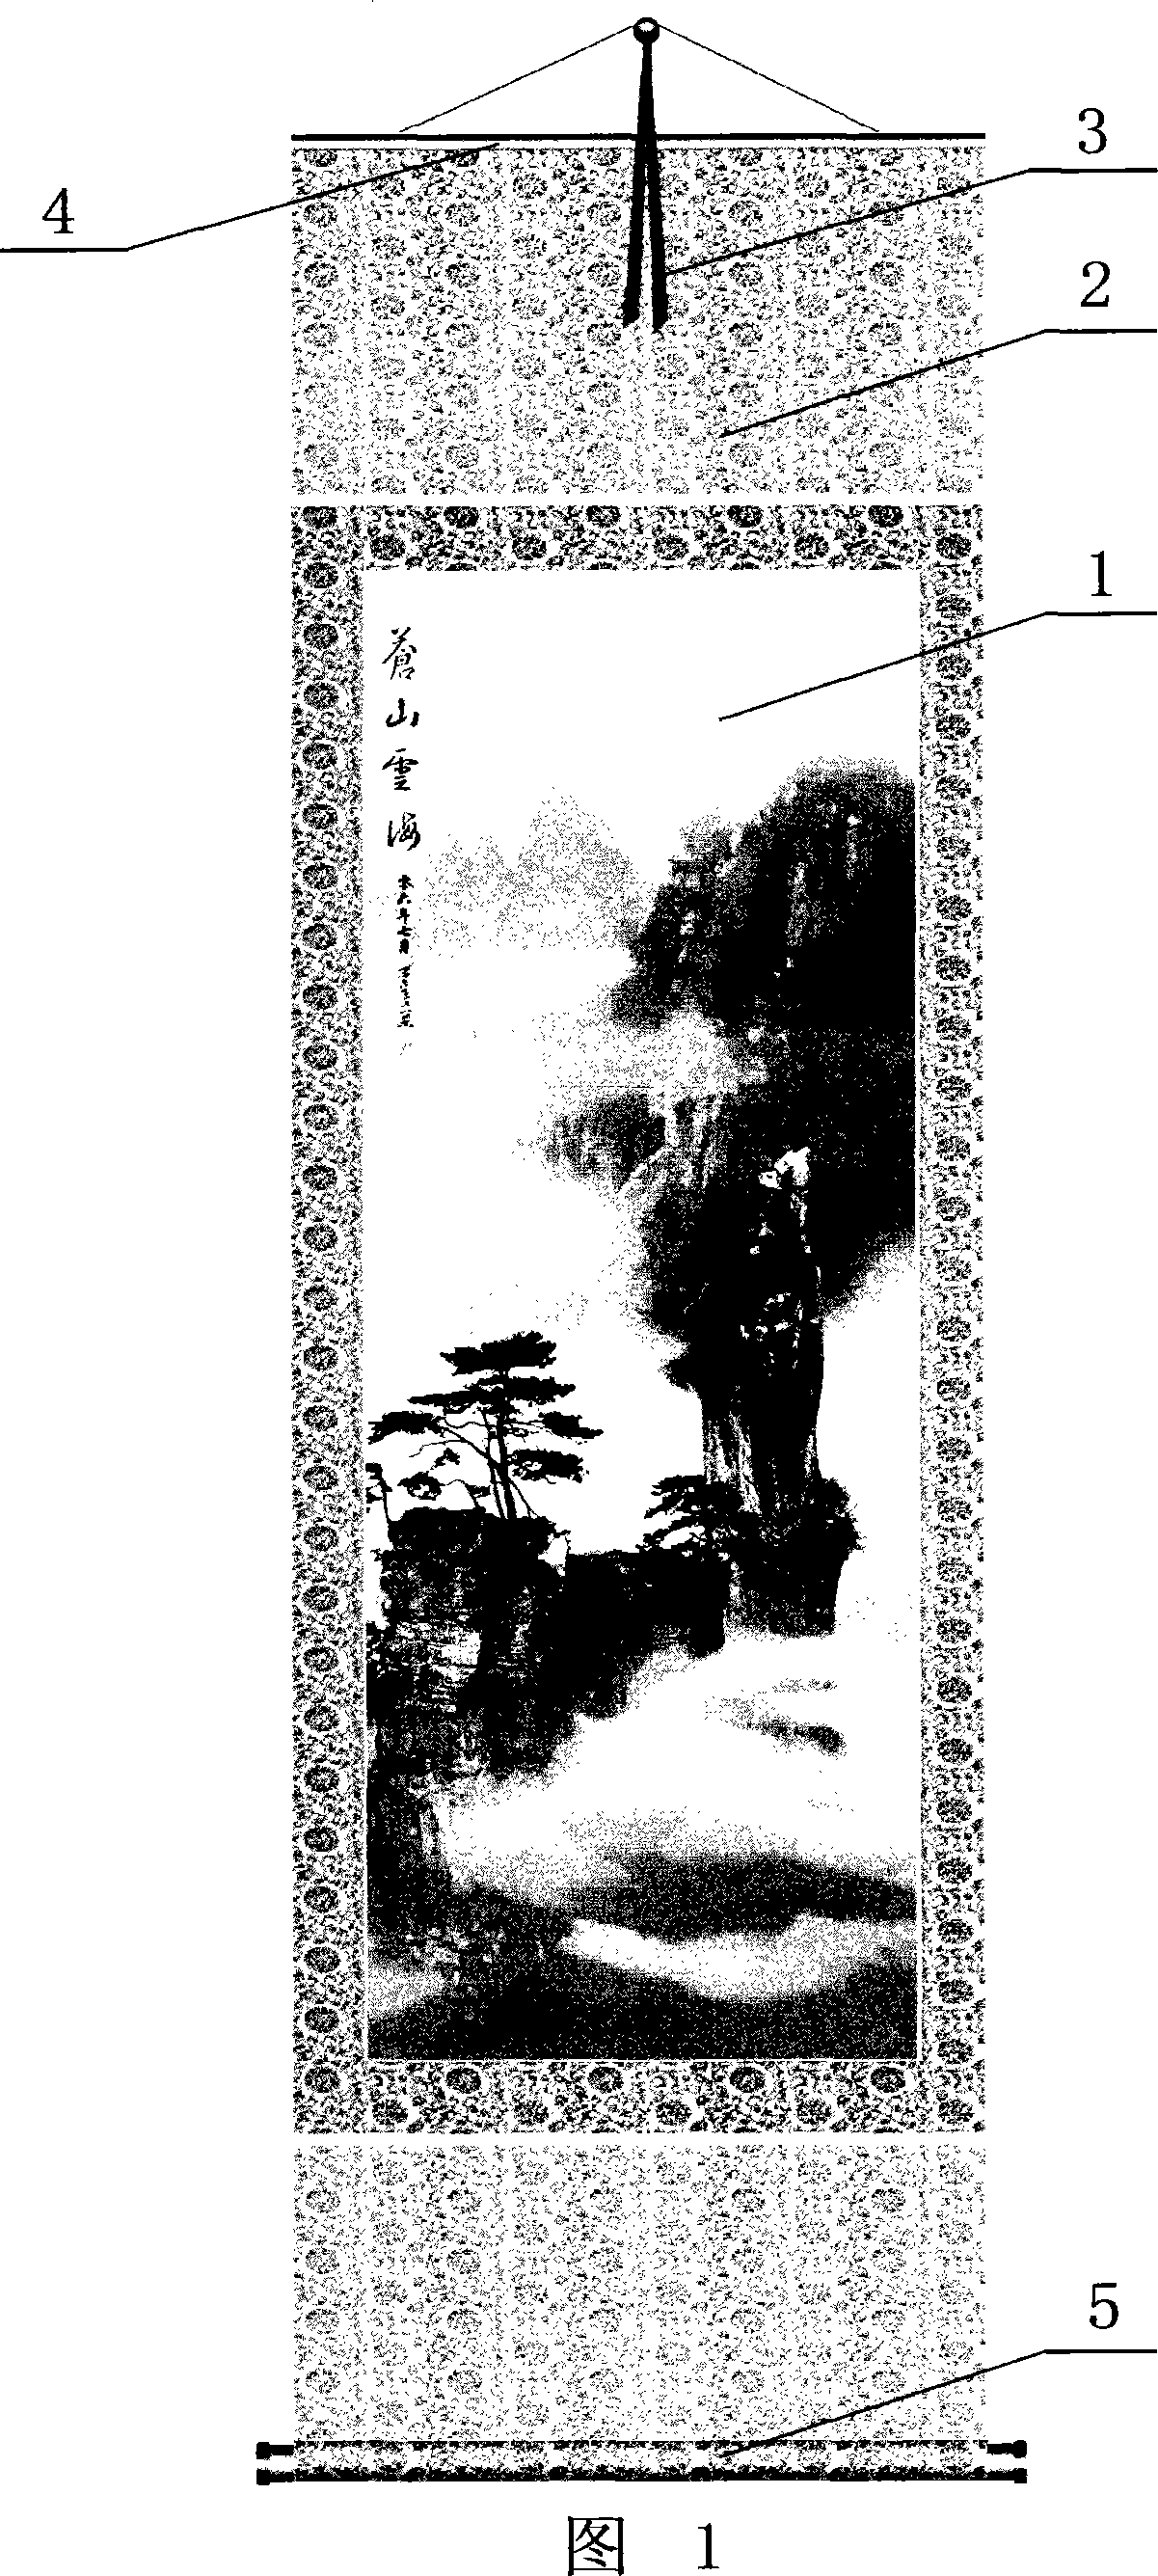 Method for making Chinese picture by employing photographic art process